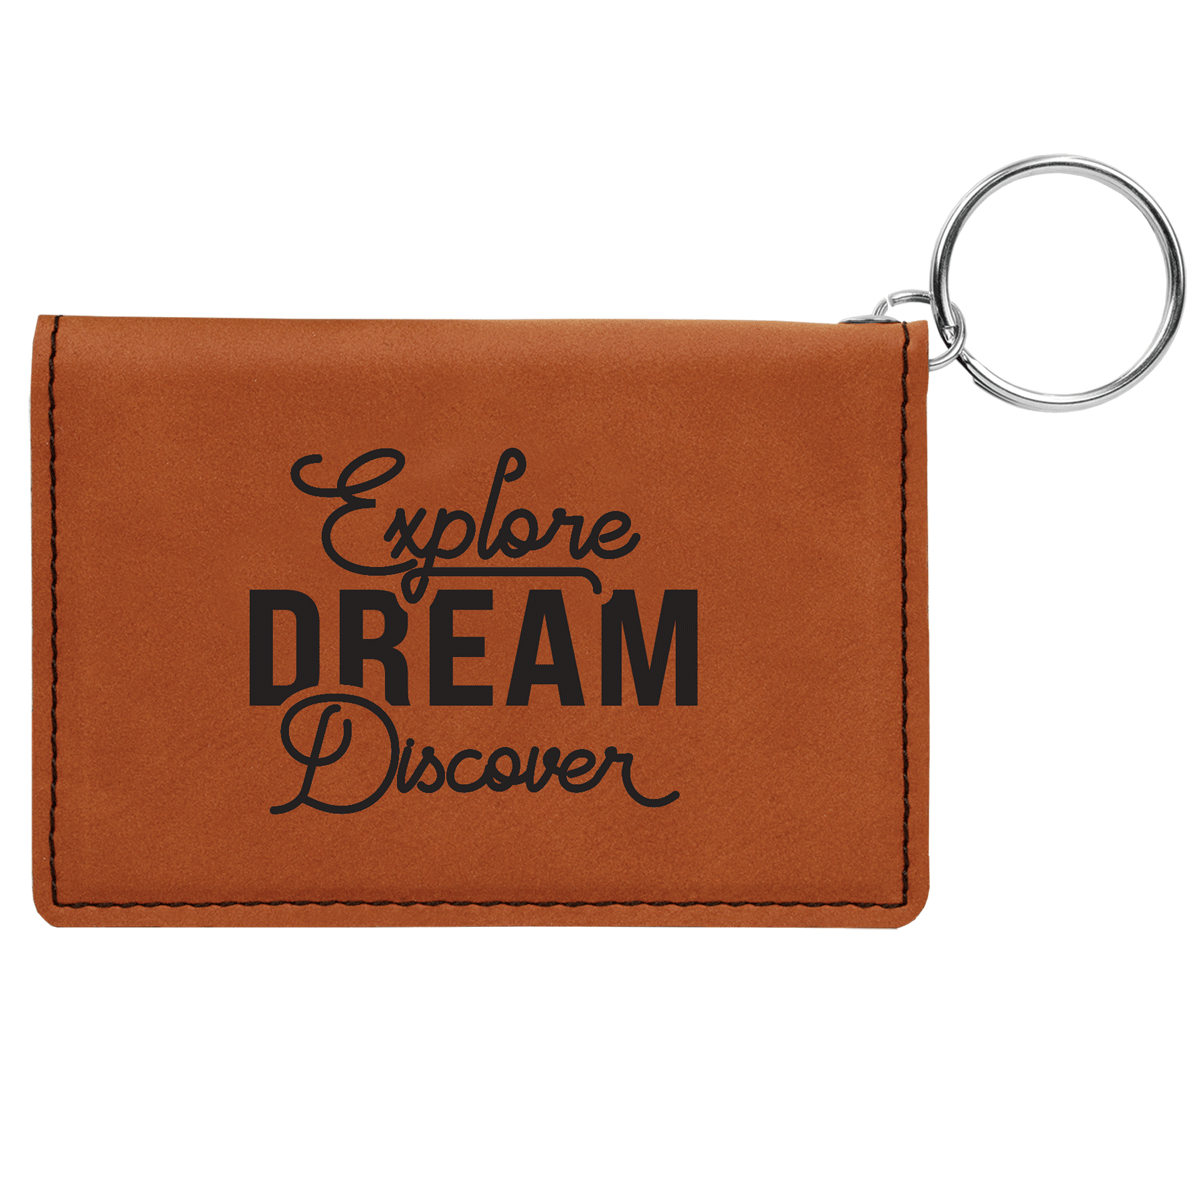 Explore-Dream-Discover - Leatherette Keychain ID Holder